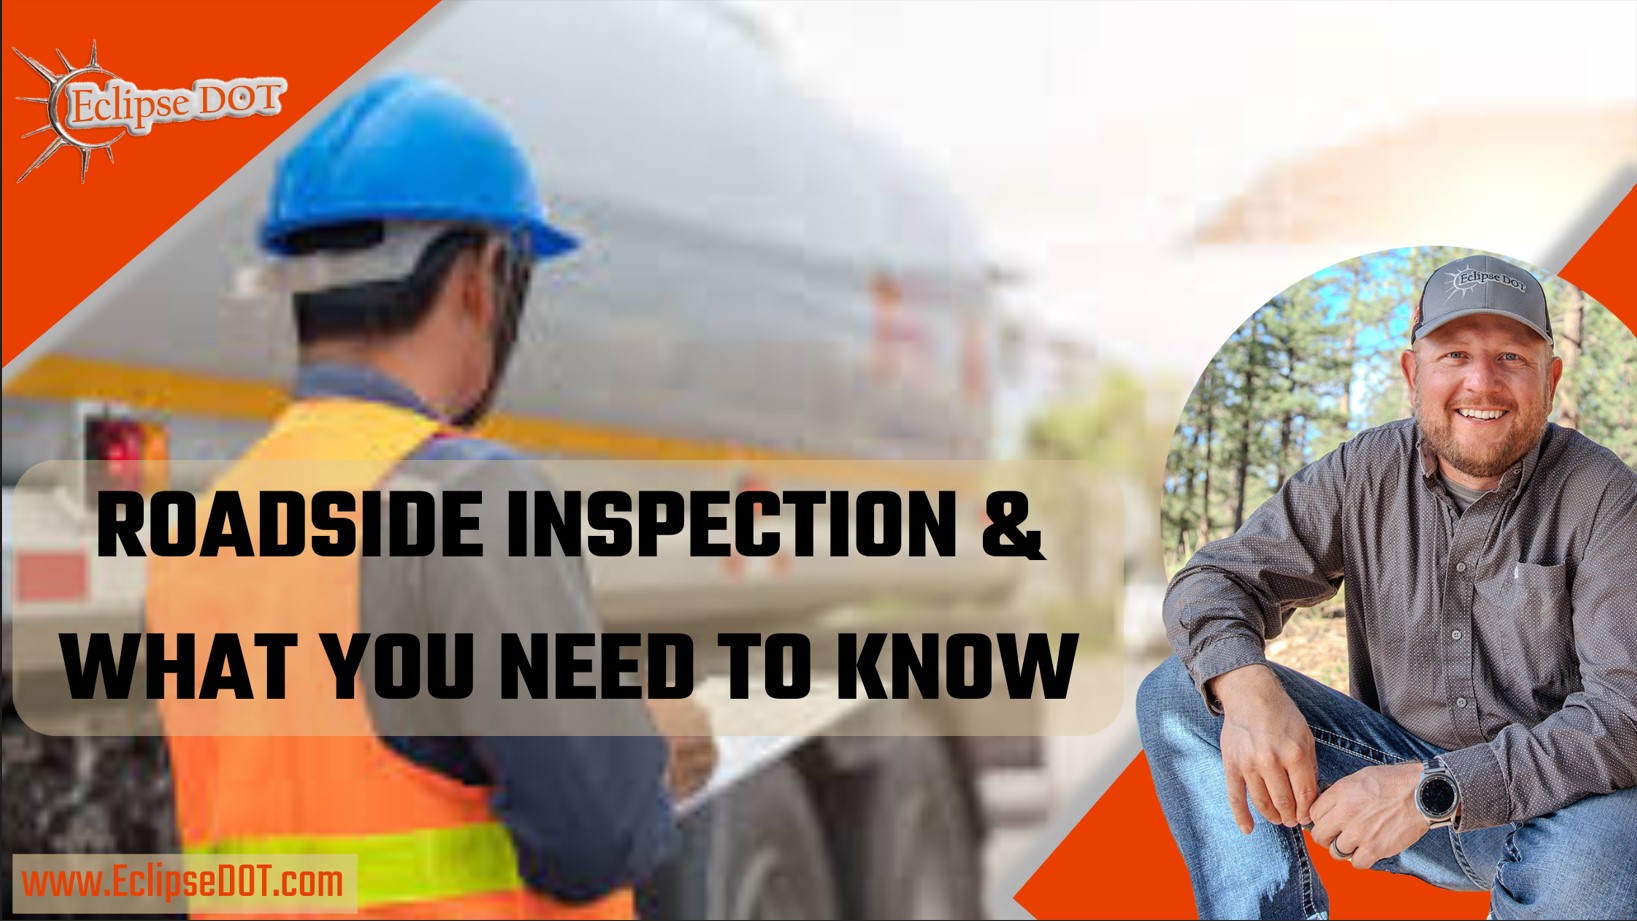 Roadside inspection essentials - What you need to know.